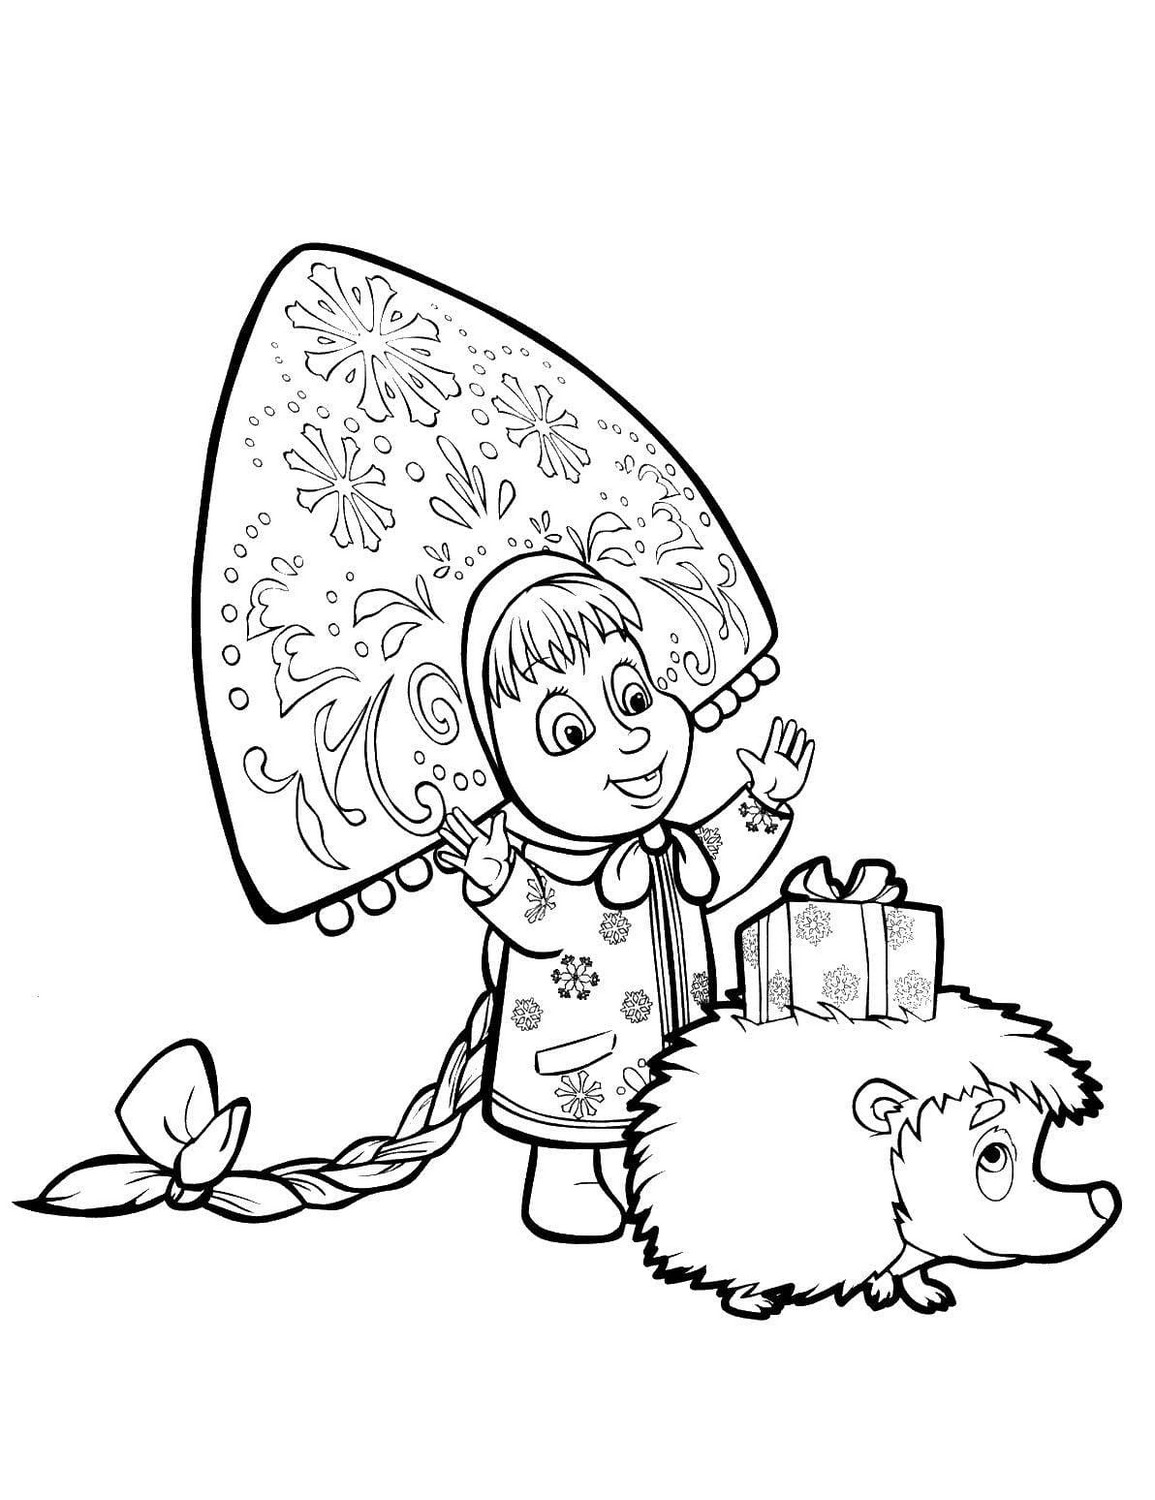 Masha and the Bear 18 drawing from Masha and the Bear to print and color